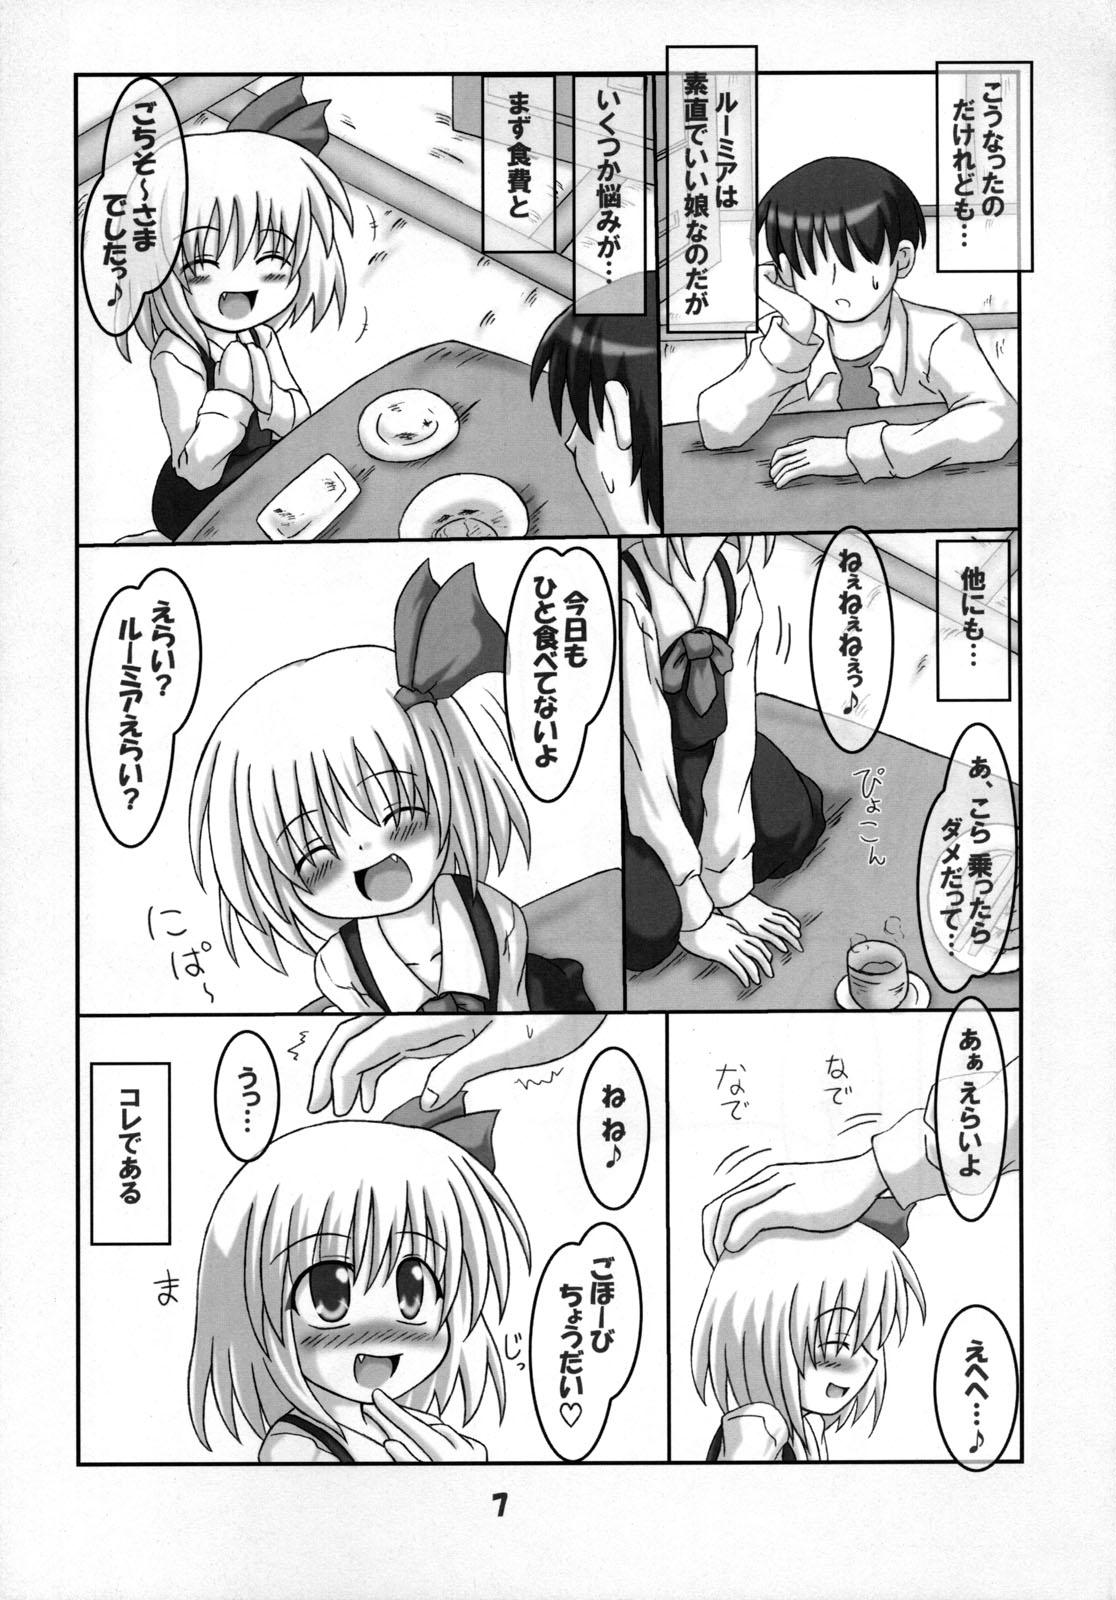 Relax Tabete mo Ii no? - Touhou project Camgirl - Page 6